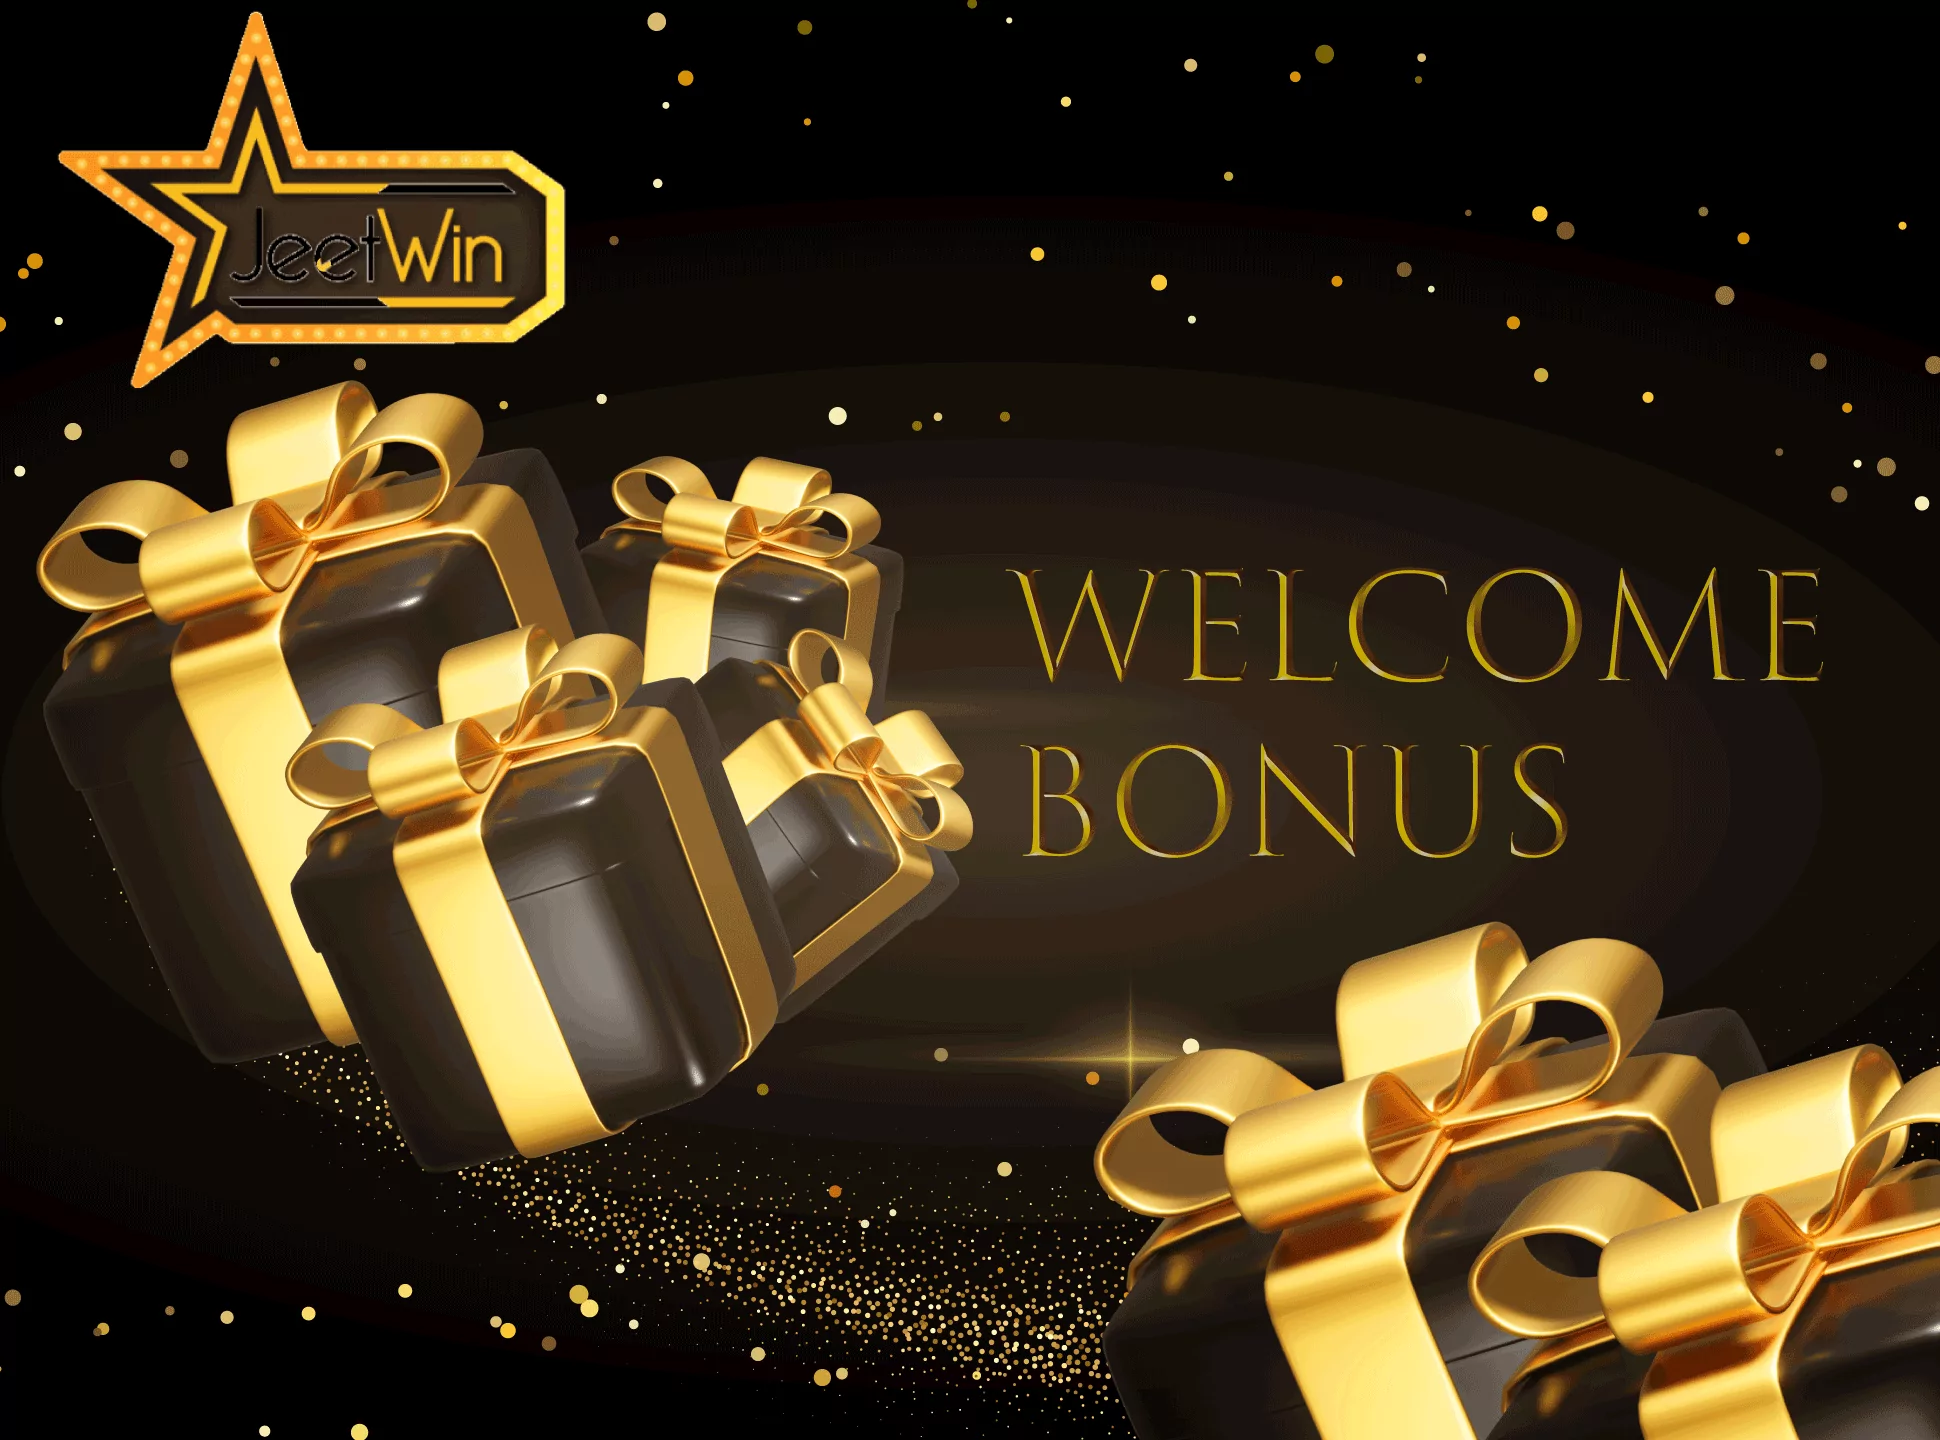 Every new Jeetwin player gets a welcome bonus after the registration and the first deposit.